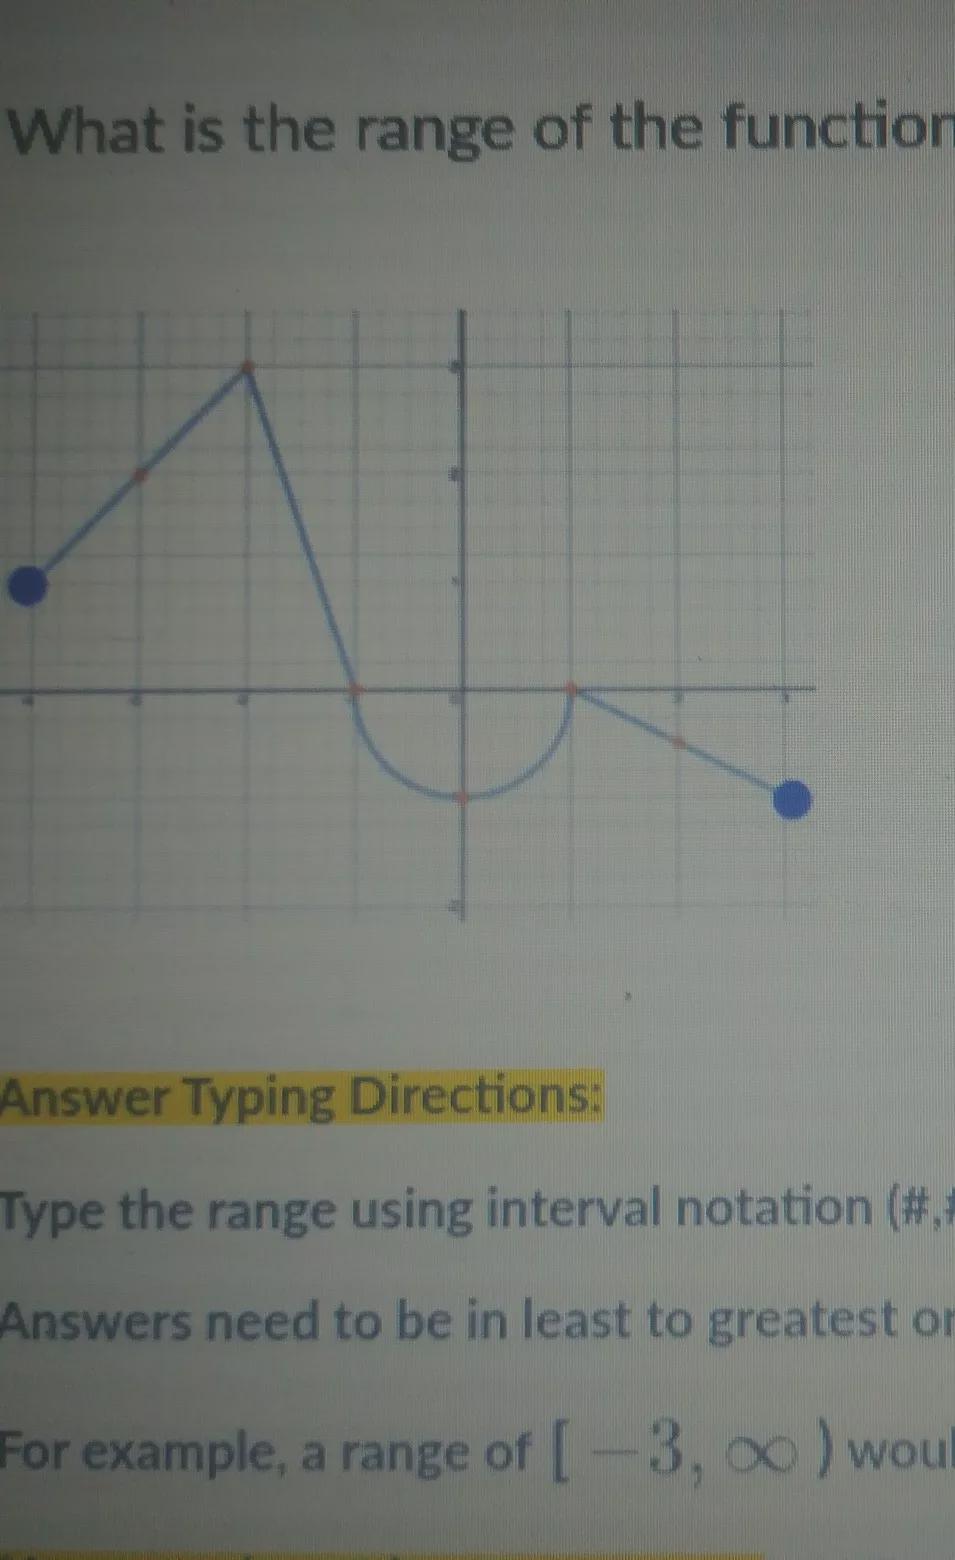 What Is The Range Of The Function?Type The Range Using Interval Notation Example : (#,#]